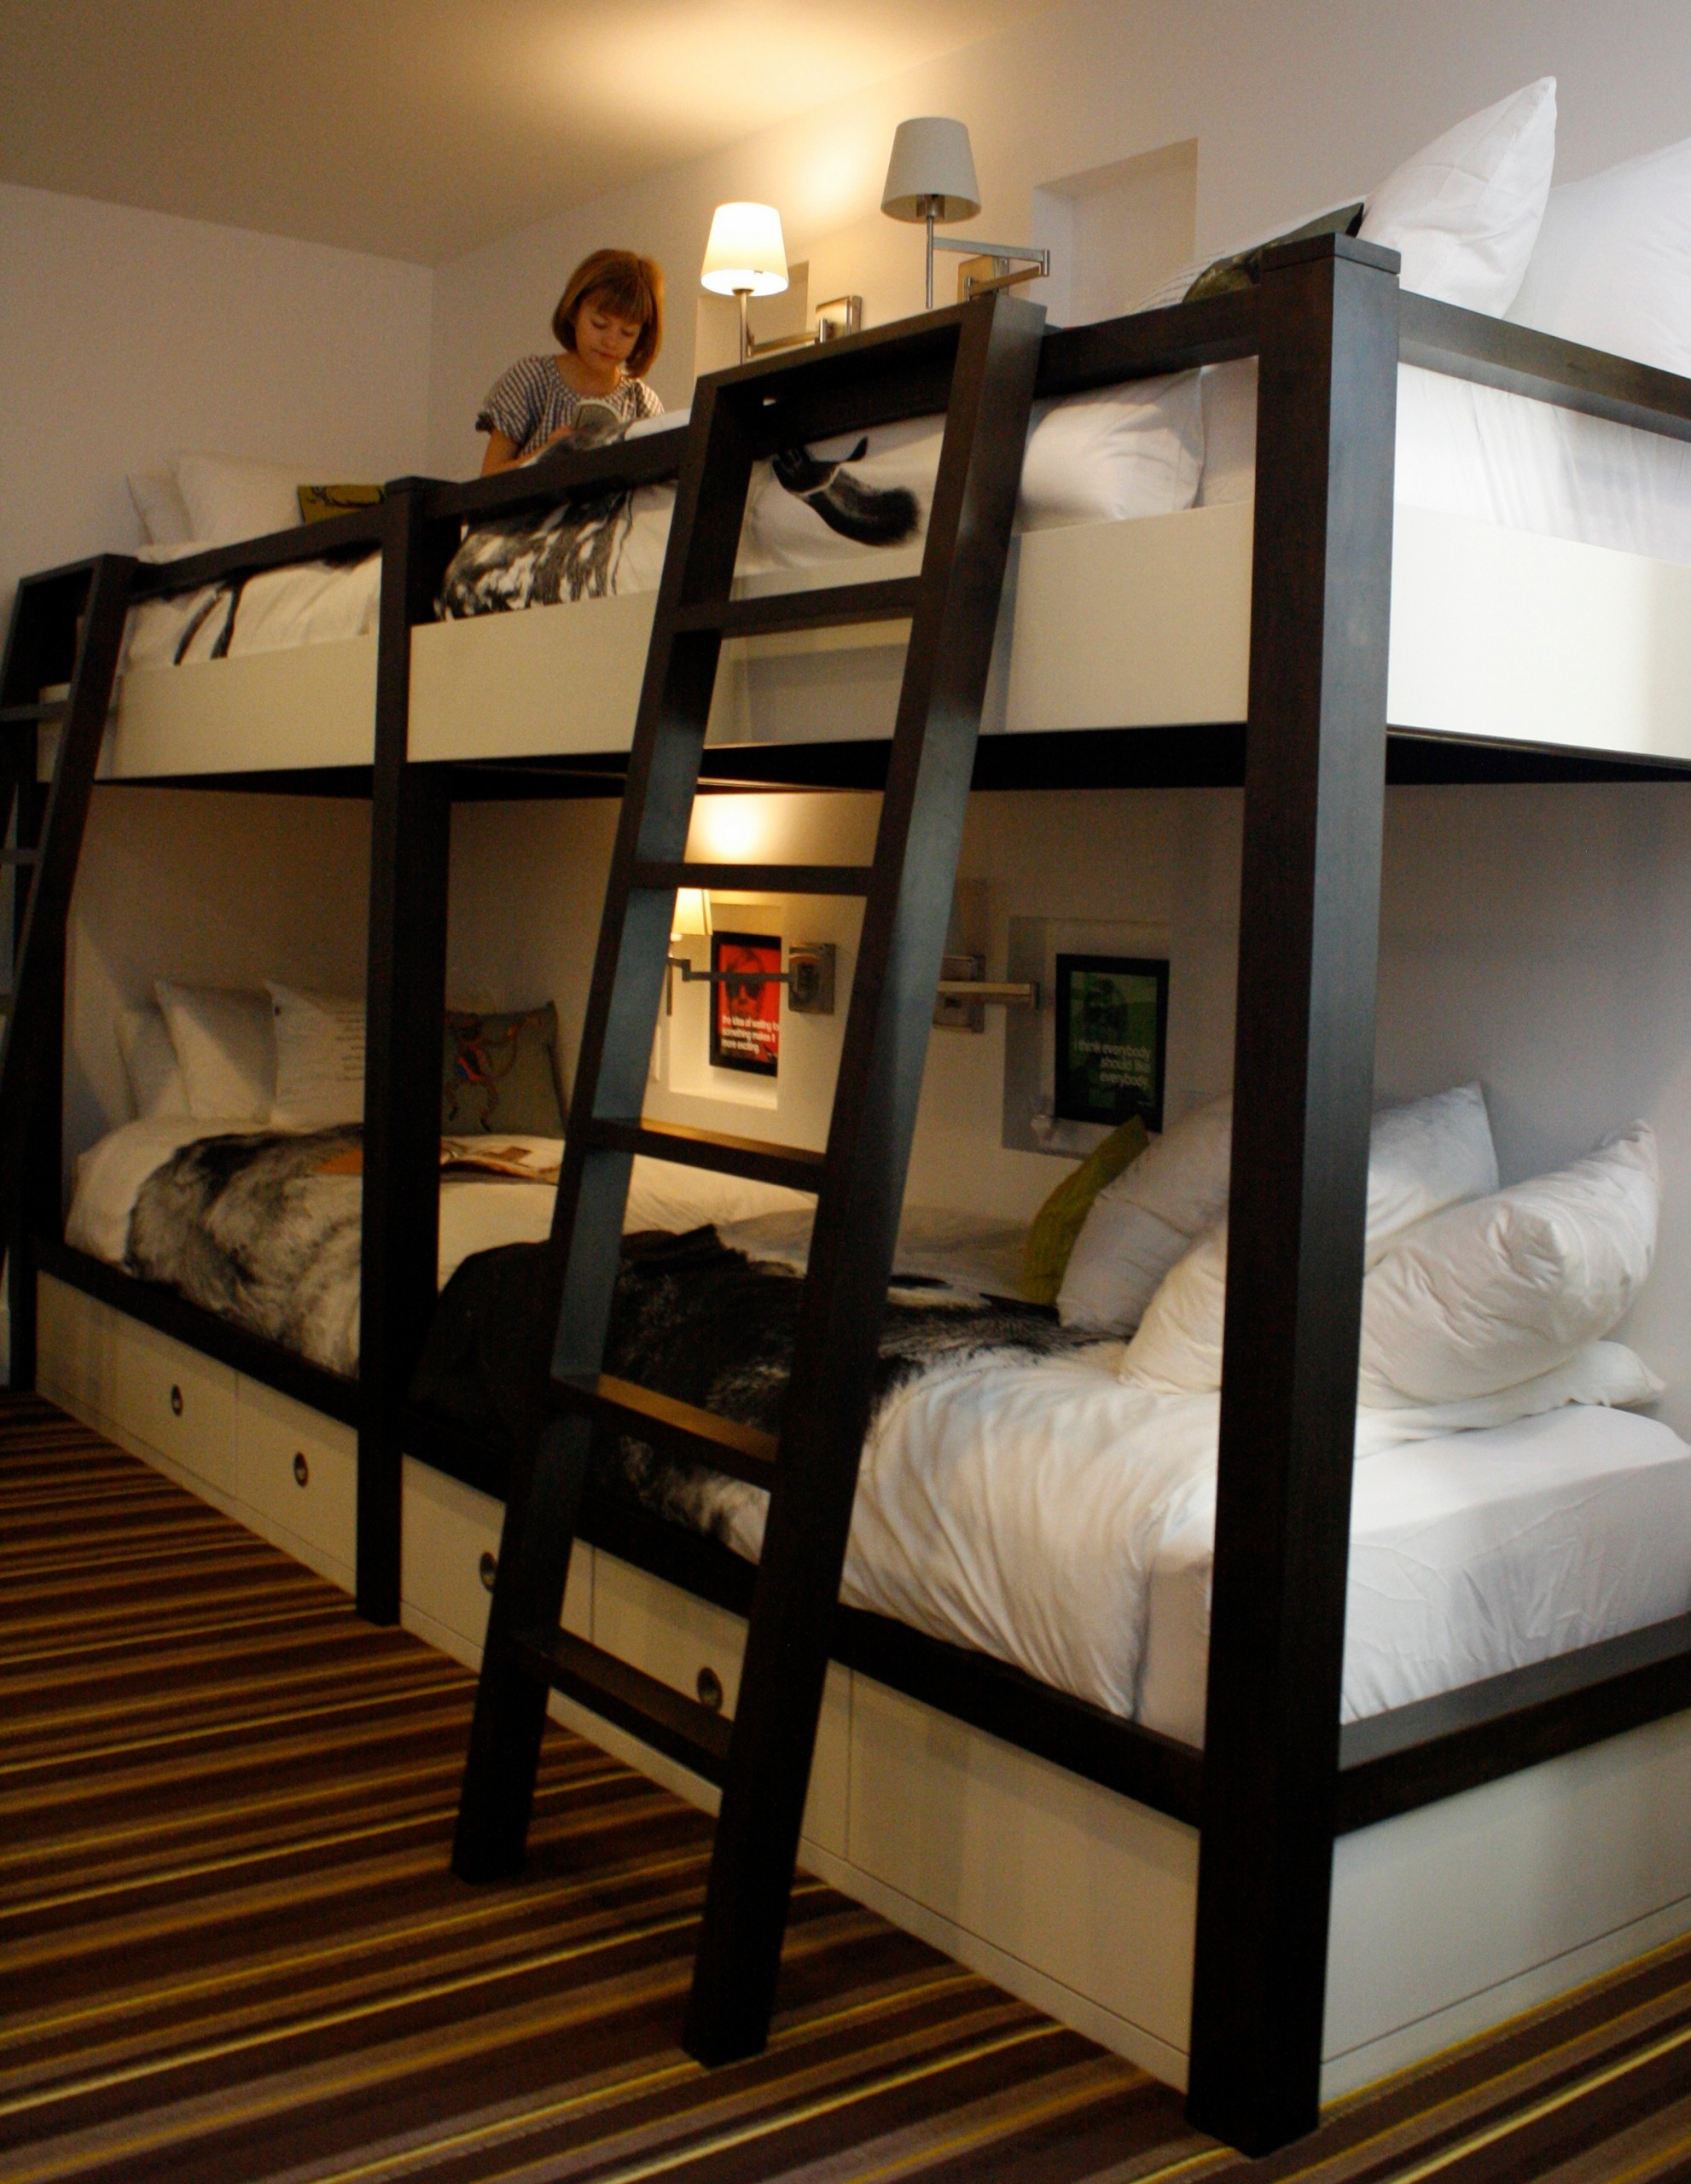 Custom Bunk Beds Modern Bedroom, How Much Does It Cost To Build Custom Bunk Beds